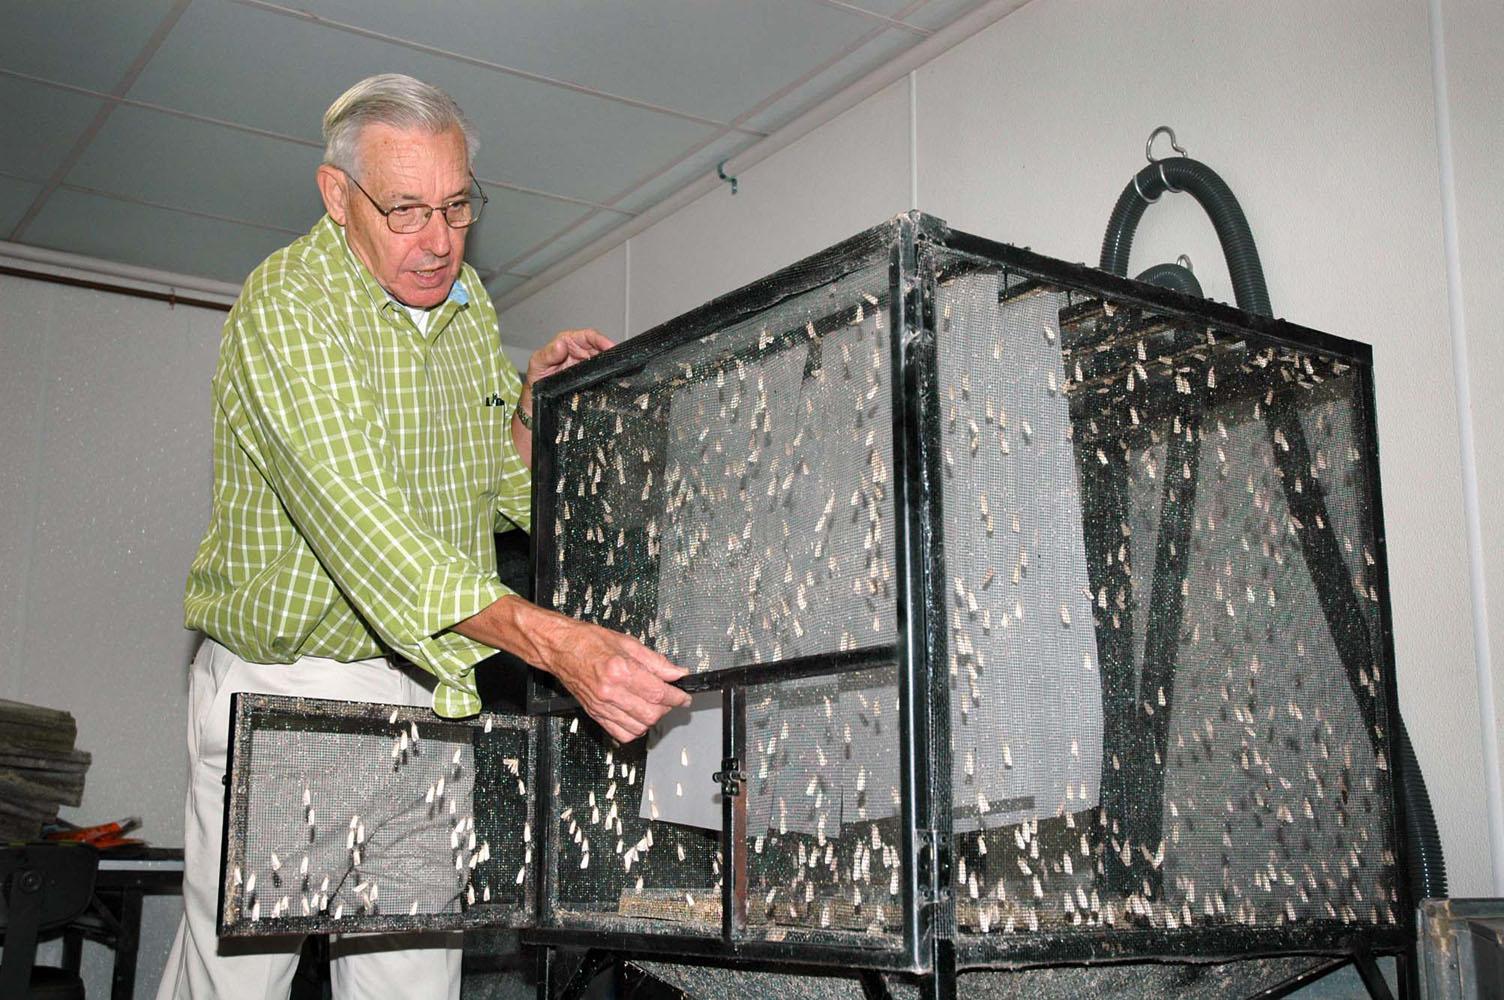 Frank Davis displays one of the large cages developed for holding adult southwestern corn borer moths at the U.S. Department of Agriculture's Agricultural Research Service facility in Starkville. (Photo by Linda Breazeale)